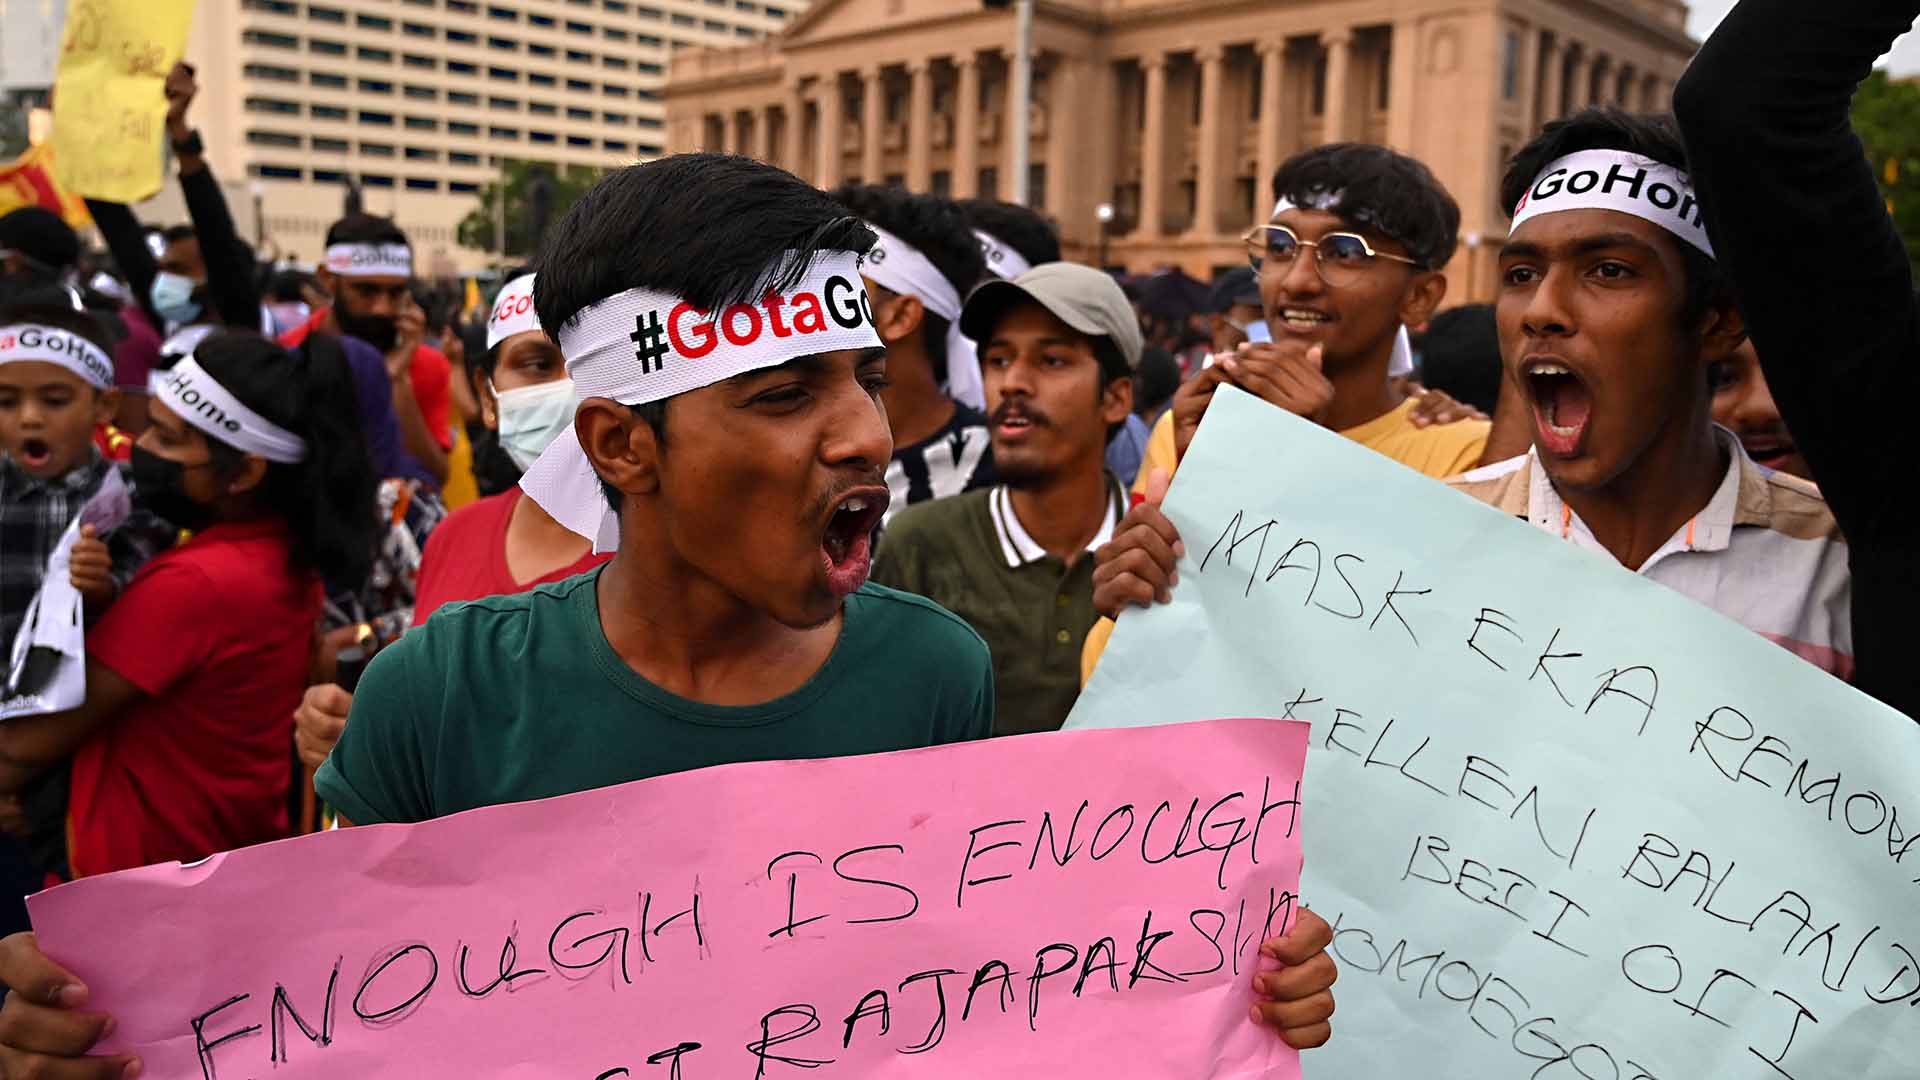 Demonstrators shout slogans and hold placards as they take part in a protest against the economic crisis at the entrance of the president's office in Colombo on April 10, 2022. - Severe shortages of food and fuel, alongside lengthy electricity blackouts, have led to weeks of widespread anti-government demonstrations with calls for President Gotabaya Rajapaksa to resign. (Photo by Ishara S. KODIKARA / AFP) (Photo by ISHARA S. KODIKARA/AFP via Getty Images)